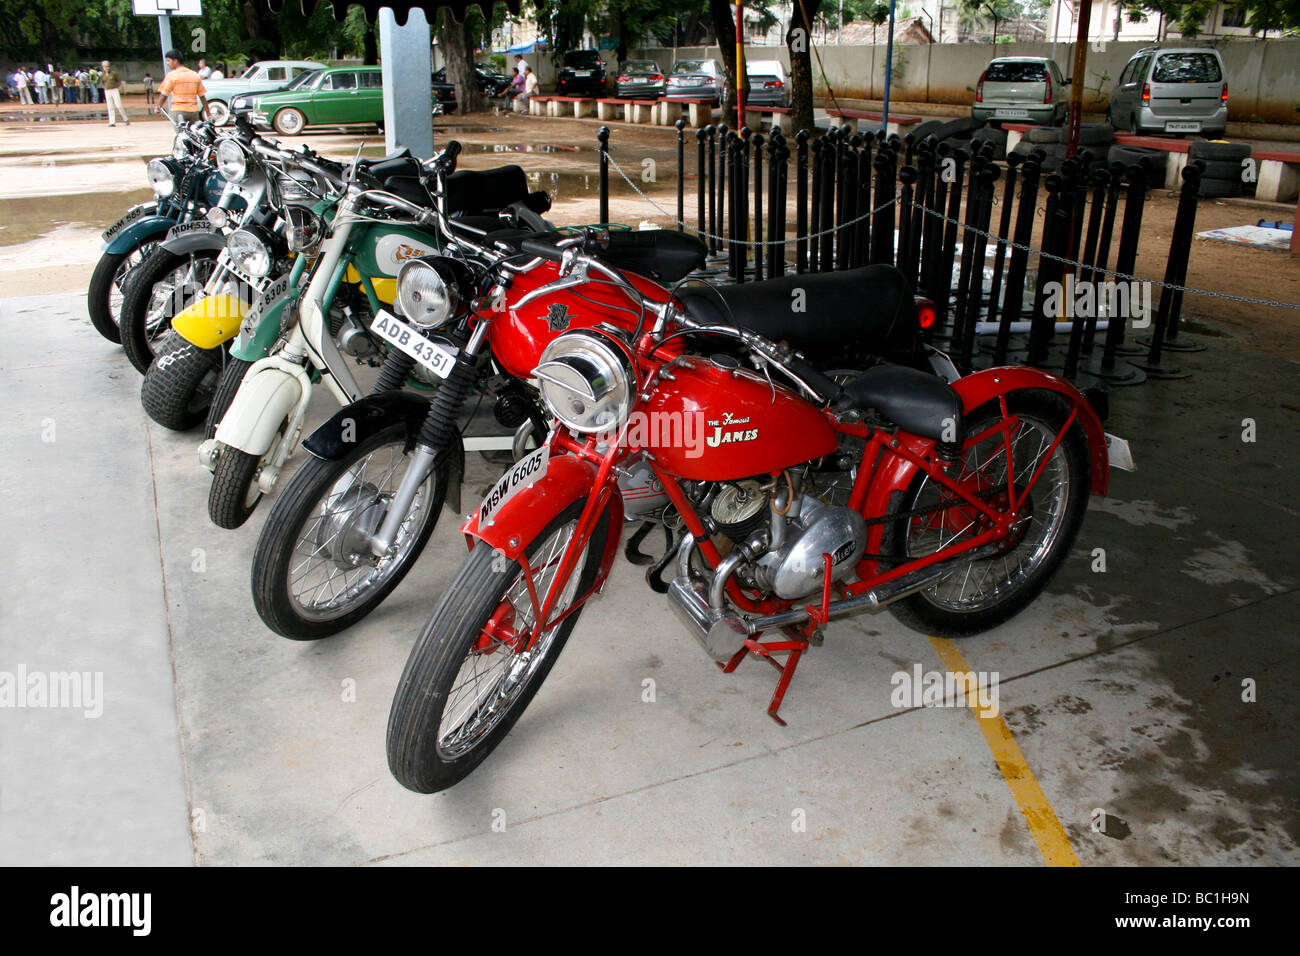 Used 1957 Model Vintage Bike For Sale In ID Red Colour